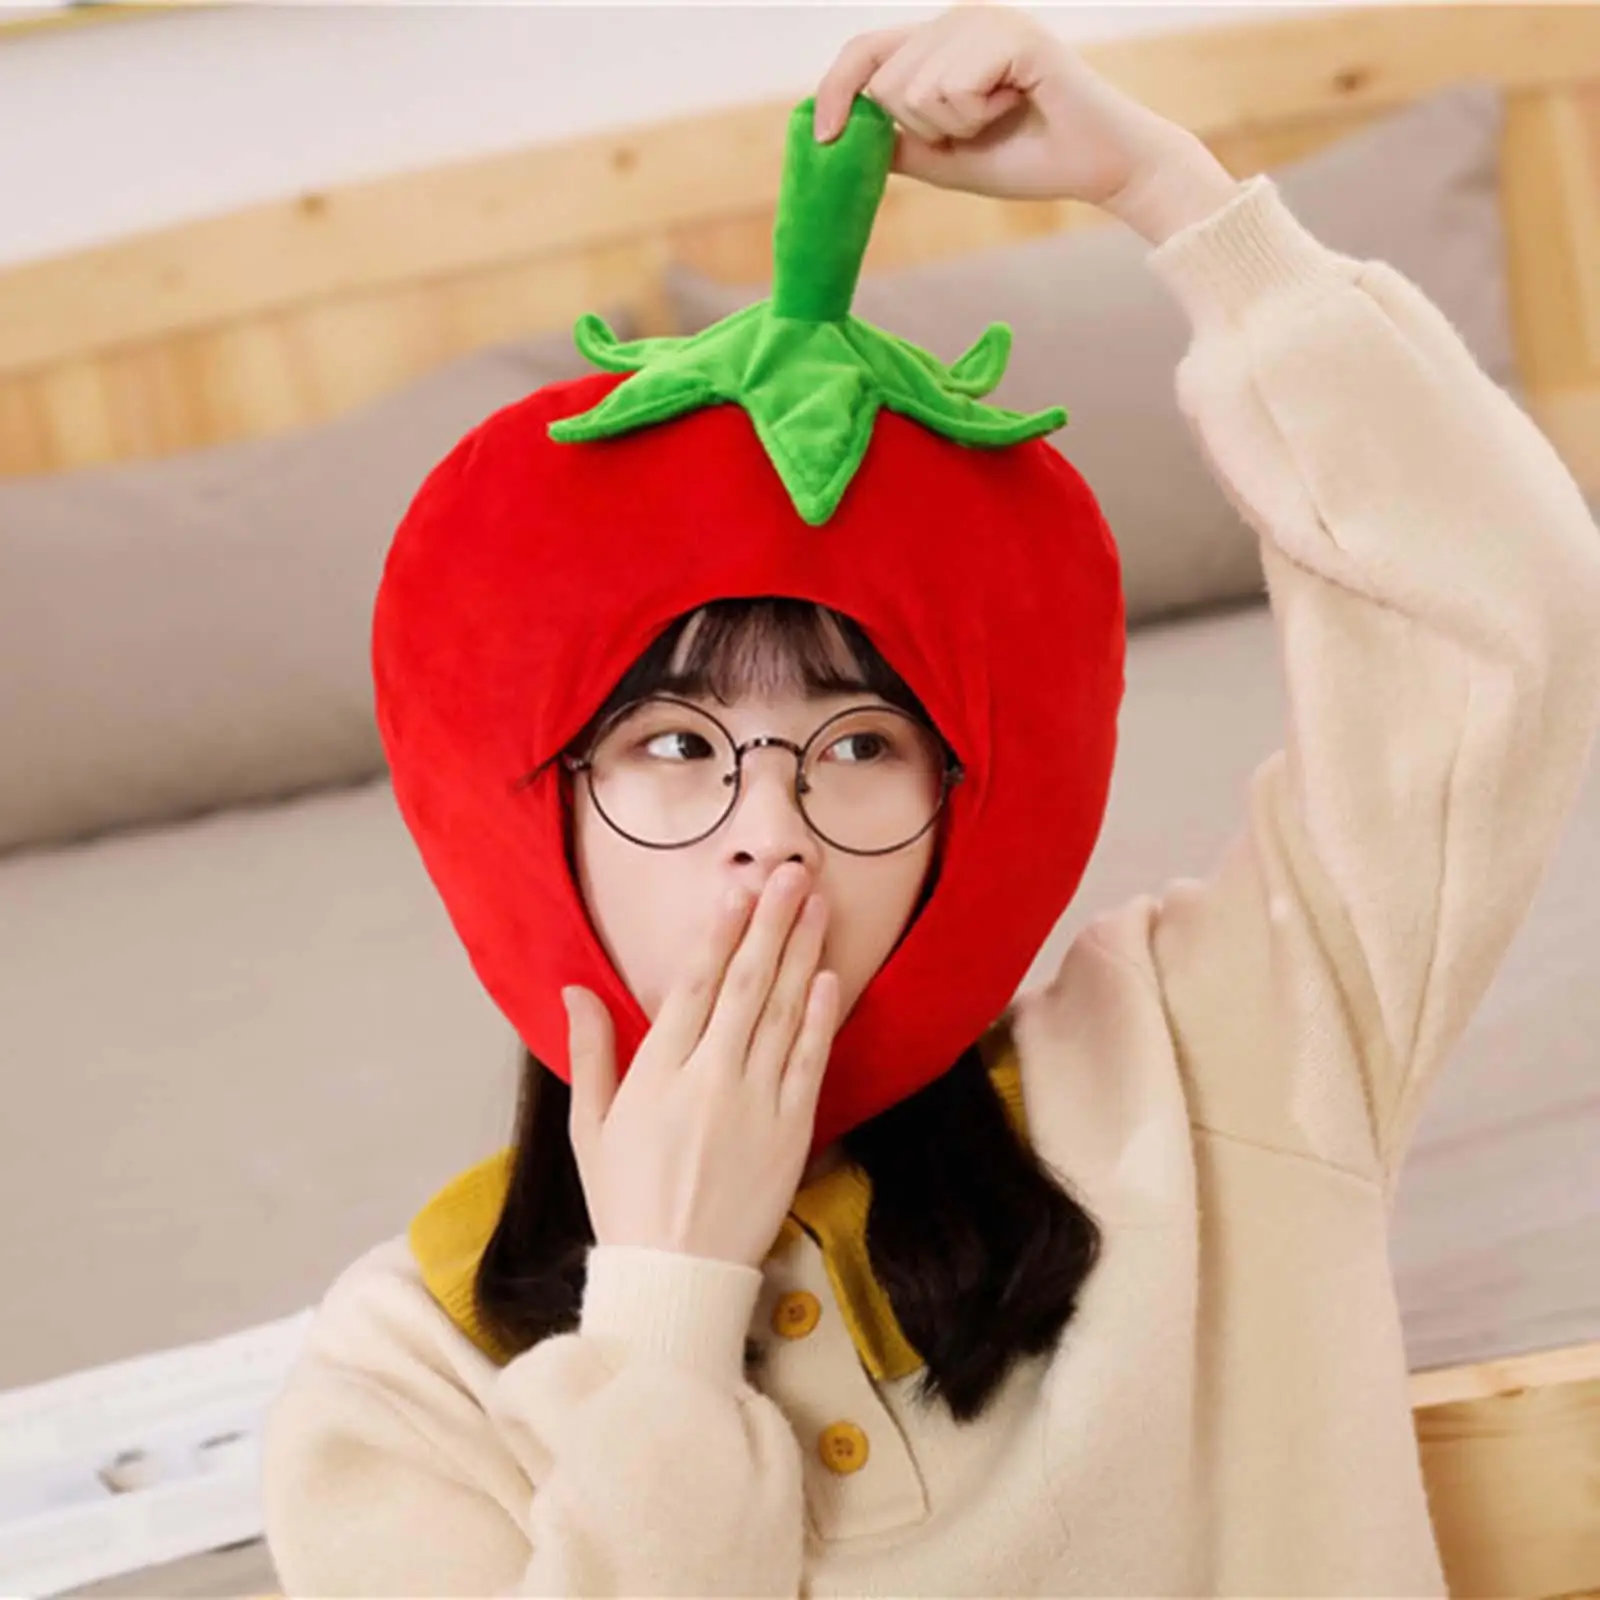 Strawberry Headgear Sleeping Pillow Toy Costume Accessory for Birthday Gifts